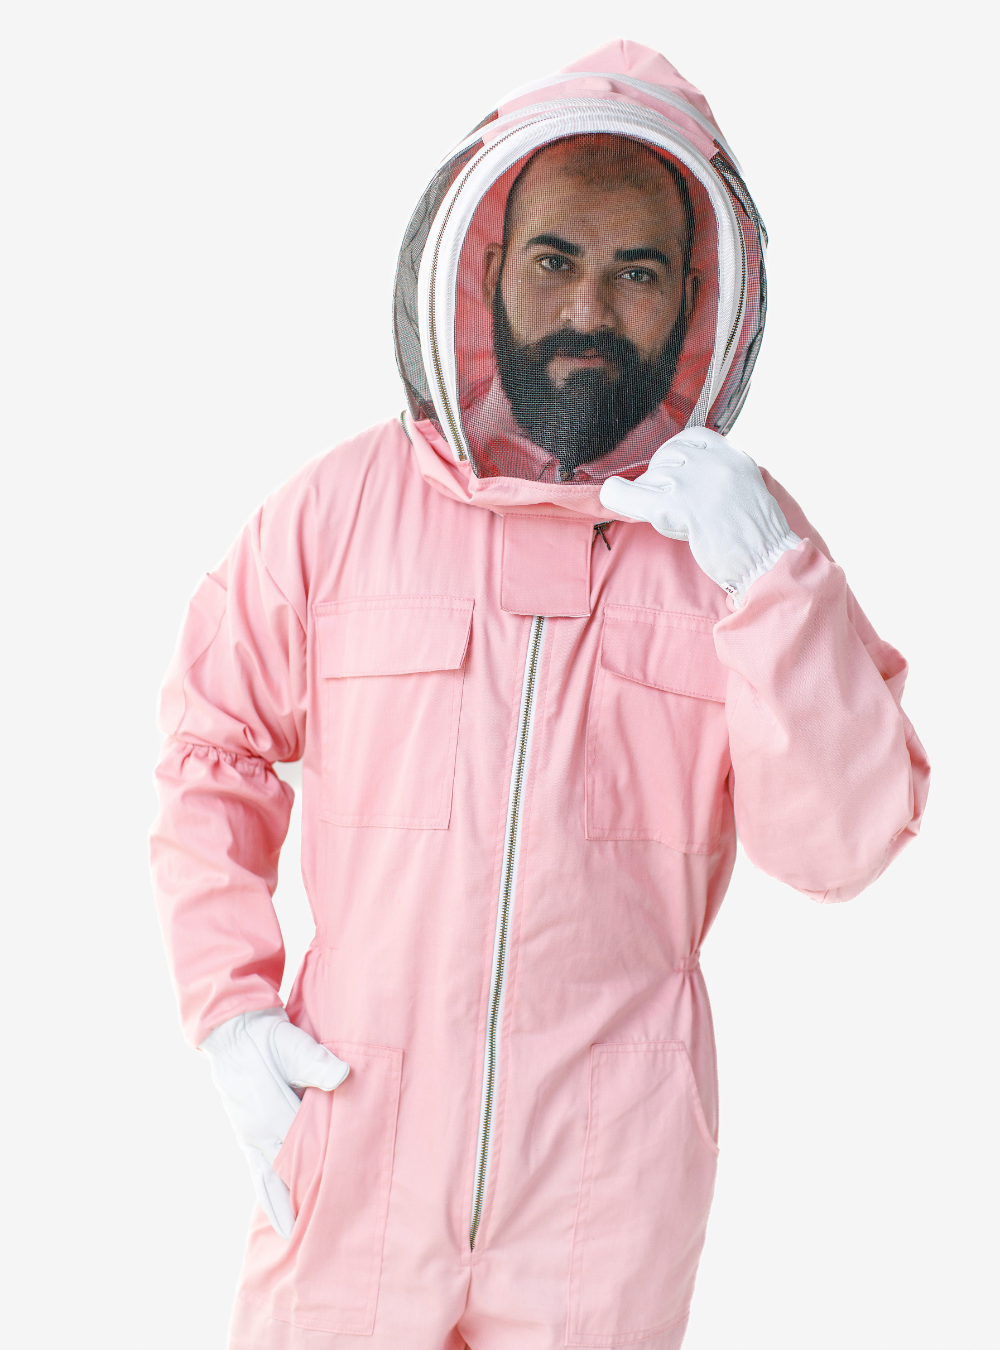 Closeup of Polycotton Pink Beekeeping Suit Classic crafted with 100% poly cotton fabric, featuring a Fencing veil, matching gloves, and ample pockets for beekeeping tools.